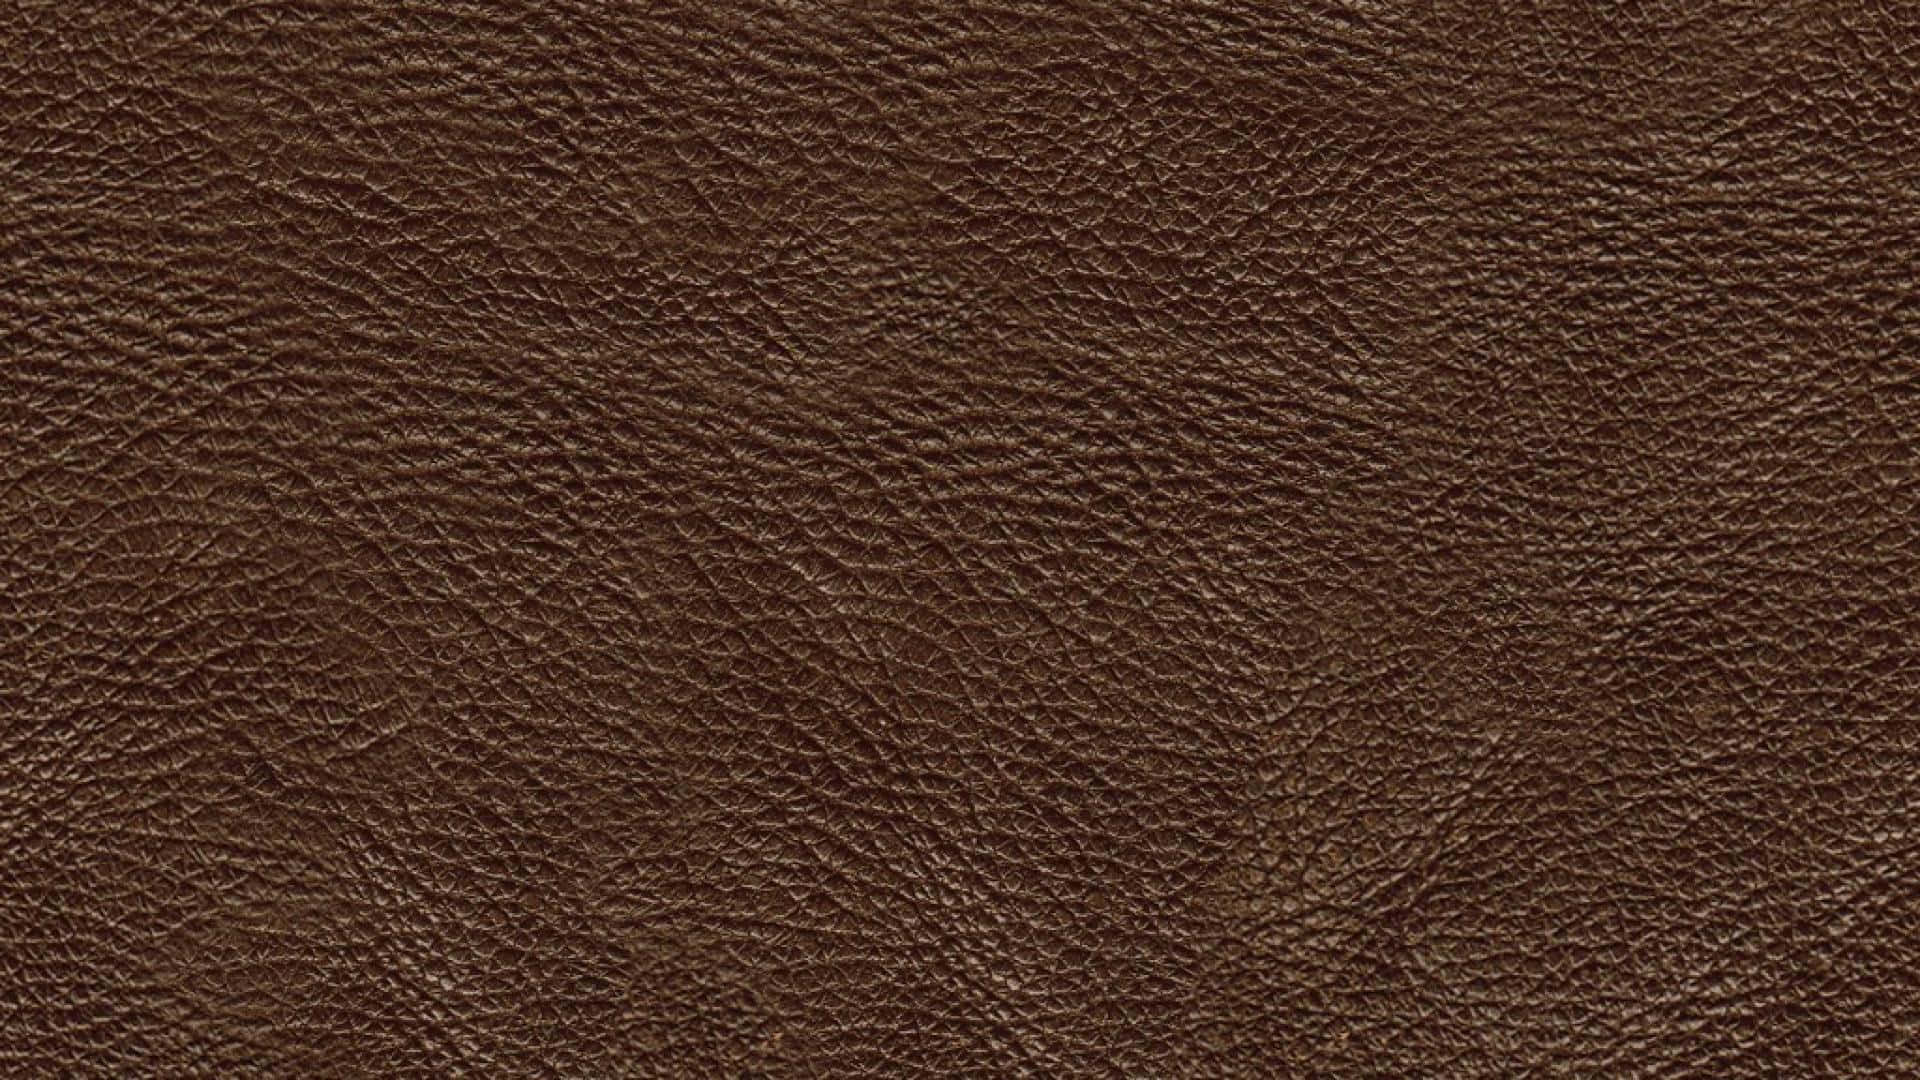 Luxurious High-Quality Brown Leather Texture Wallpaper